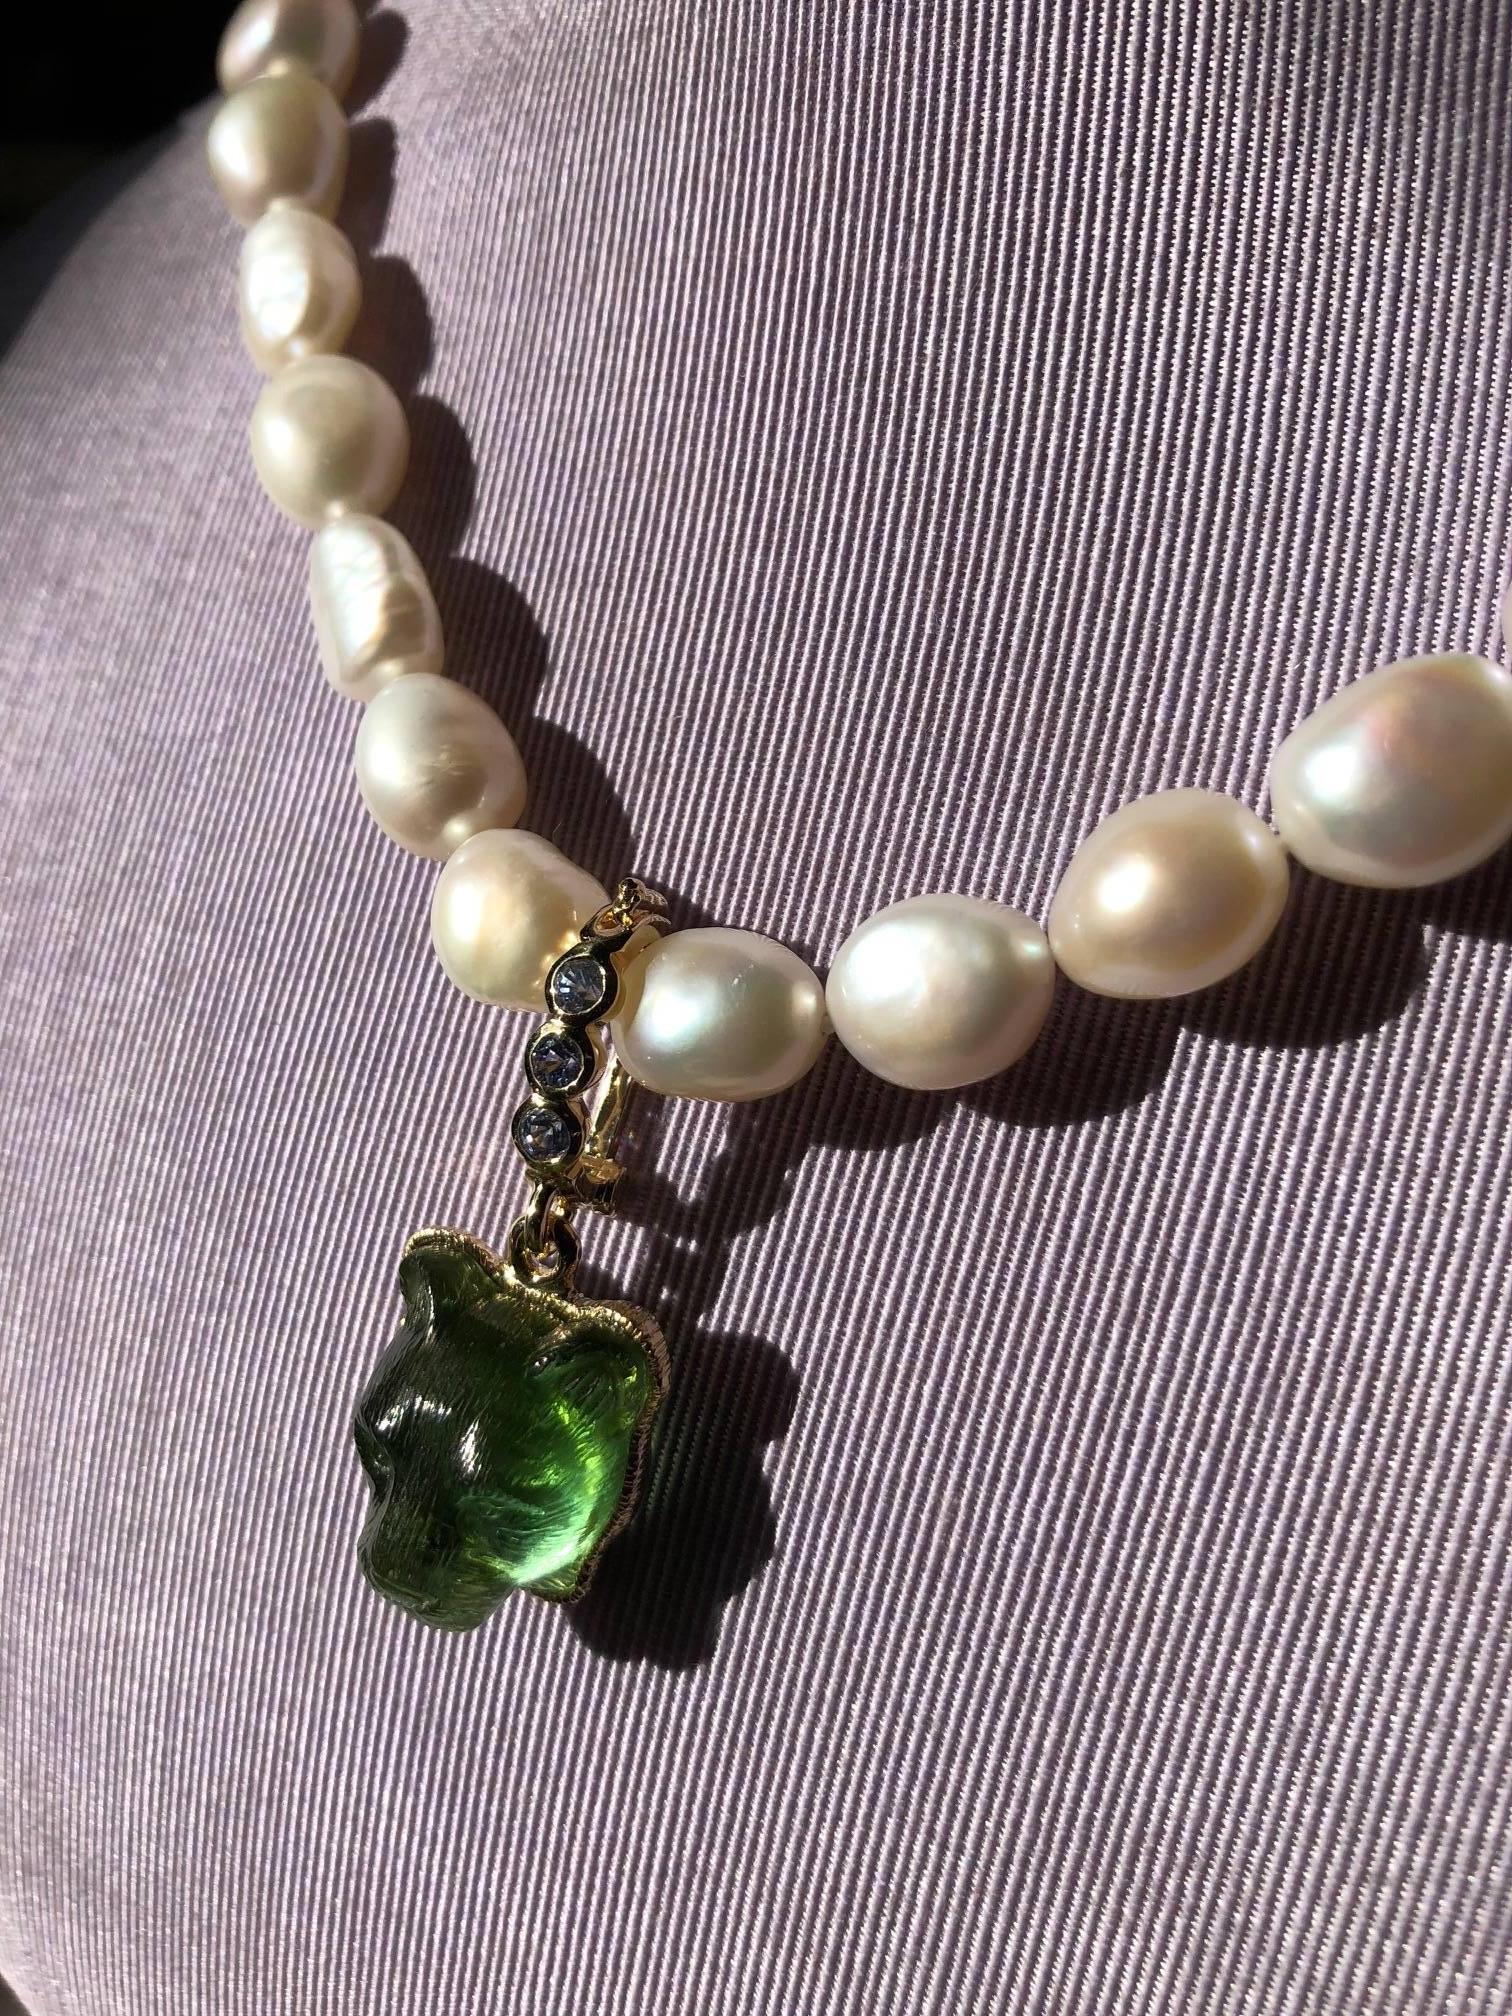 Exquisite Sapphire and gold 18 karat hand carved green tourmaline  Lionshead with 16 inch pearl necklace								
